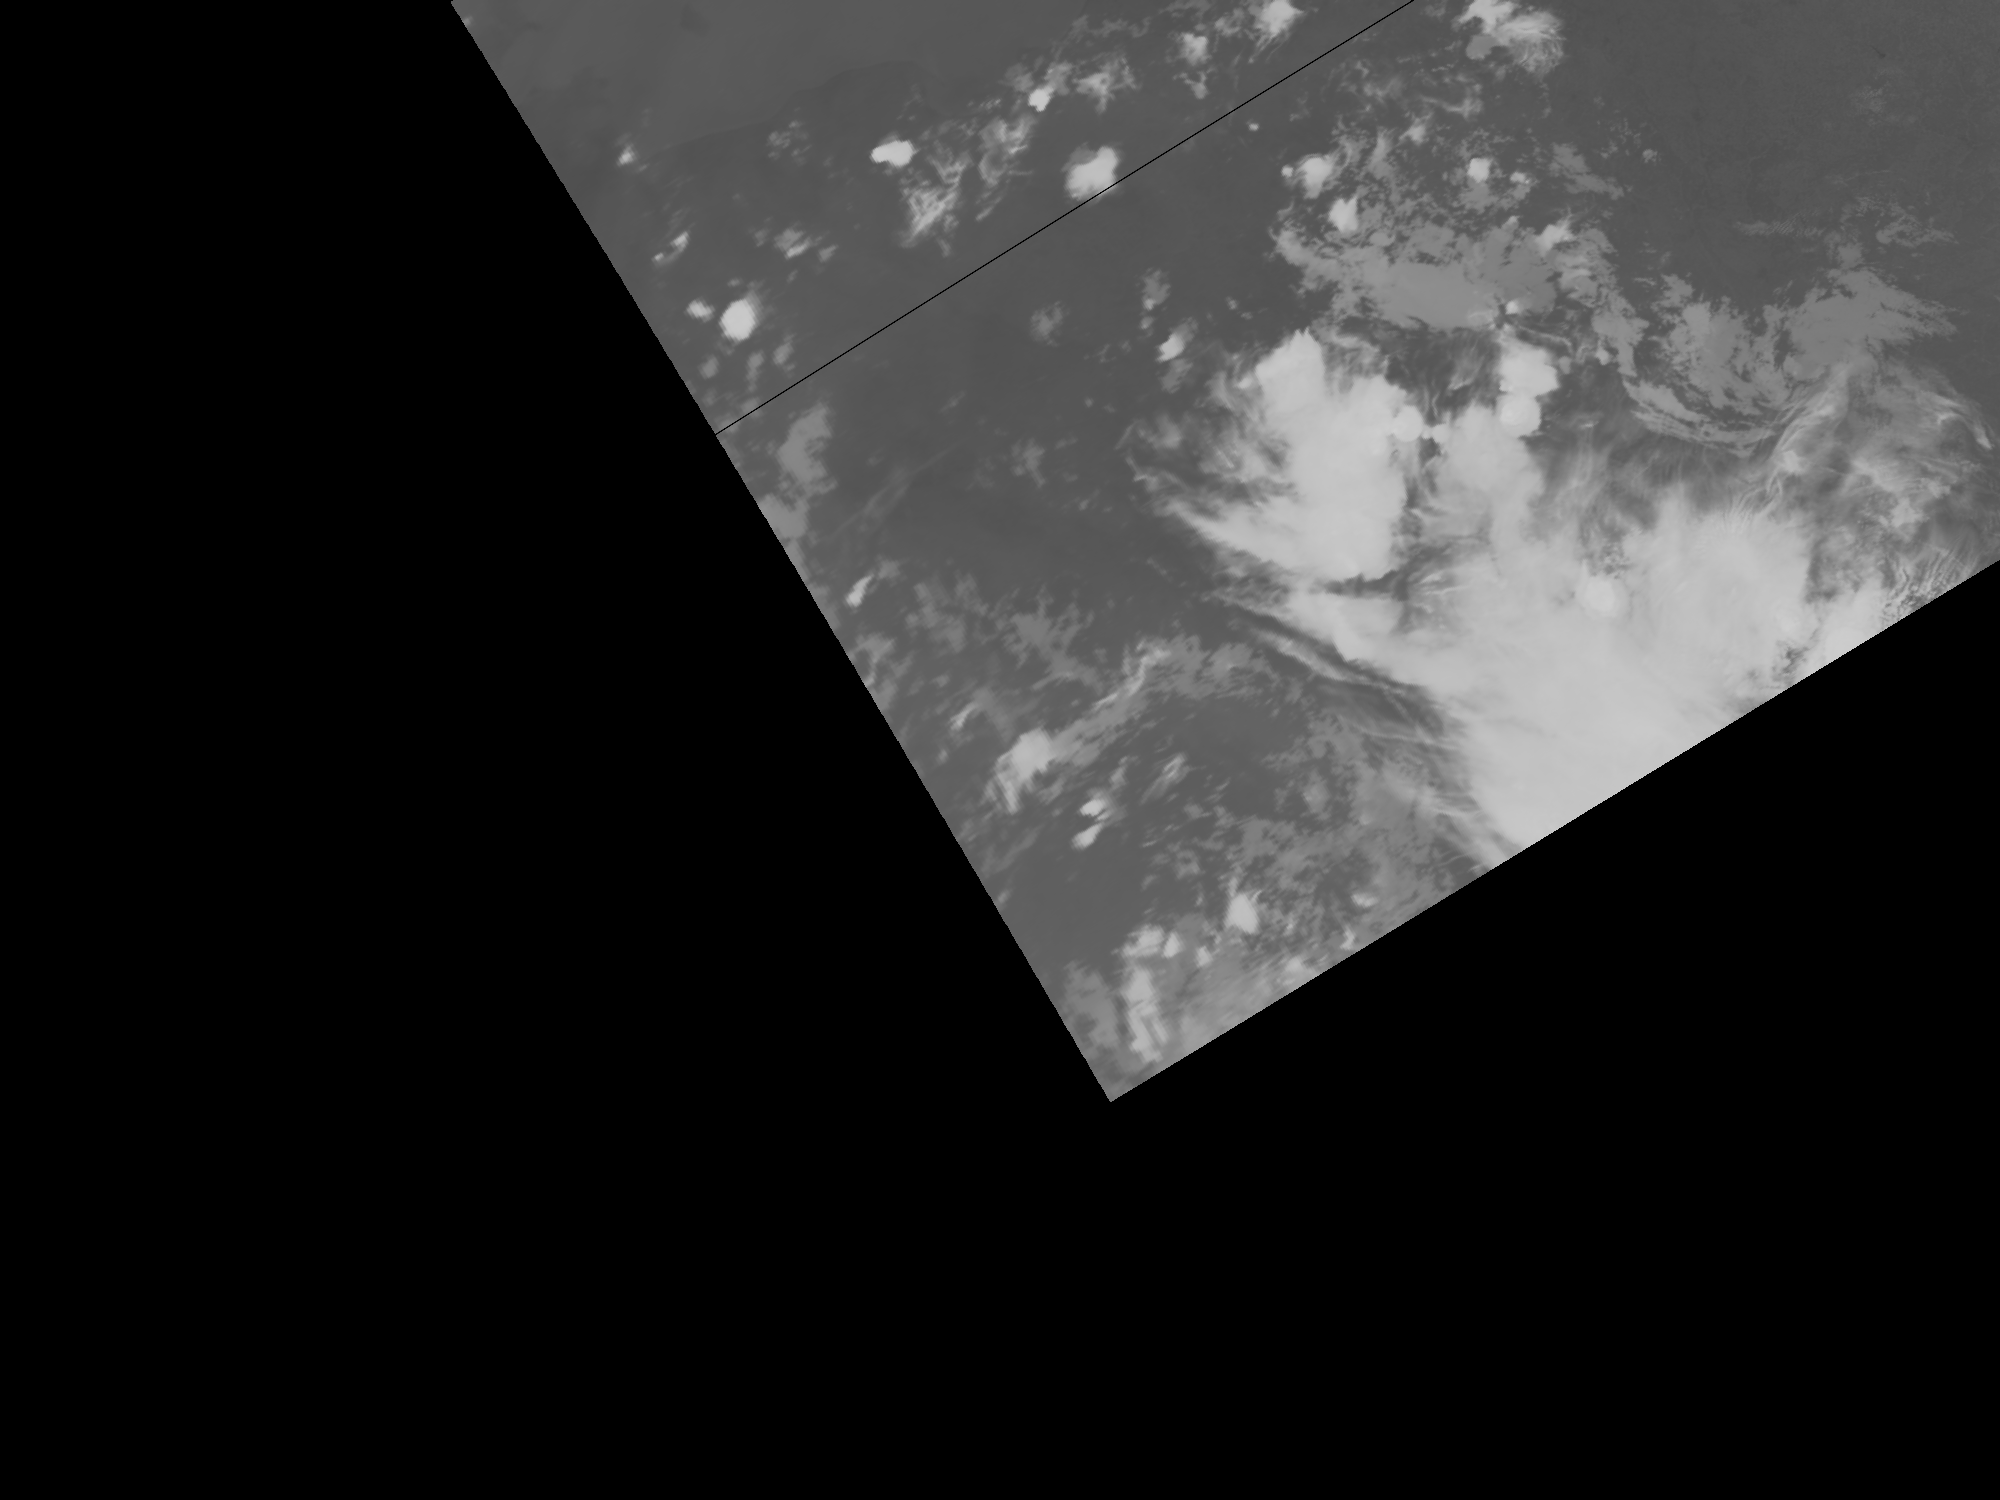 MetOp-C image with missing line